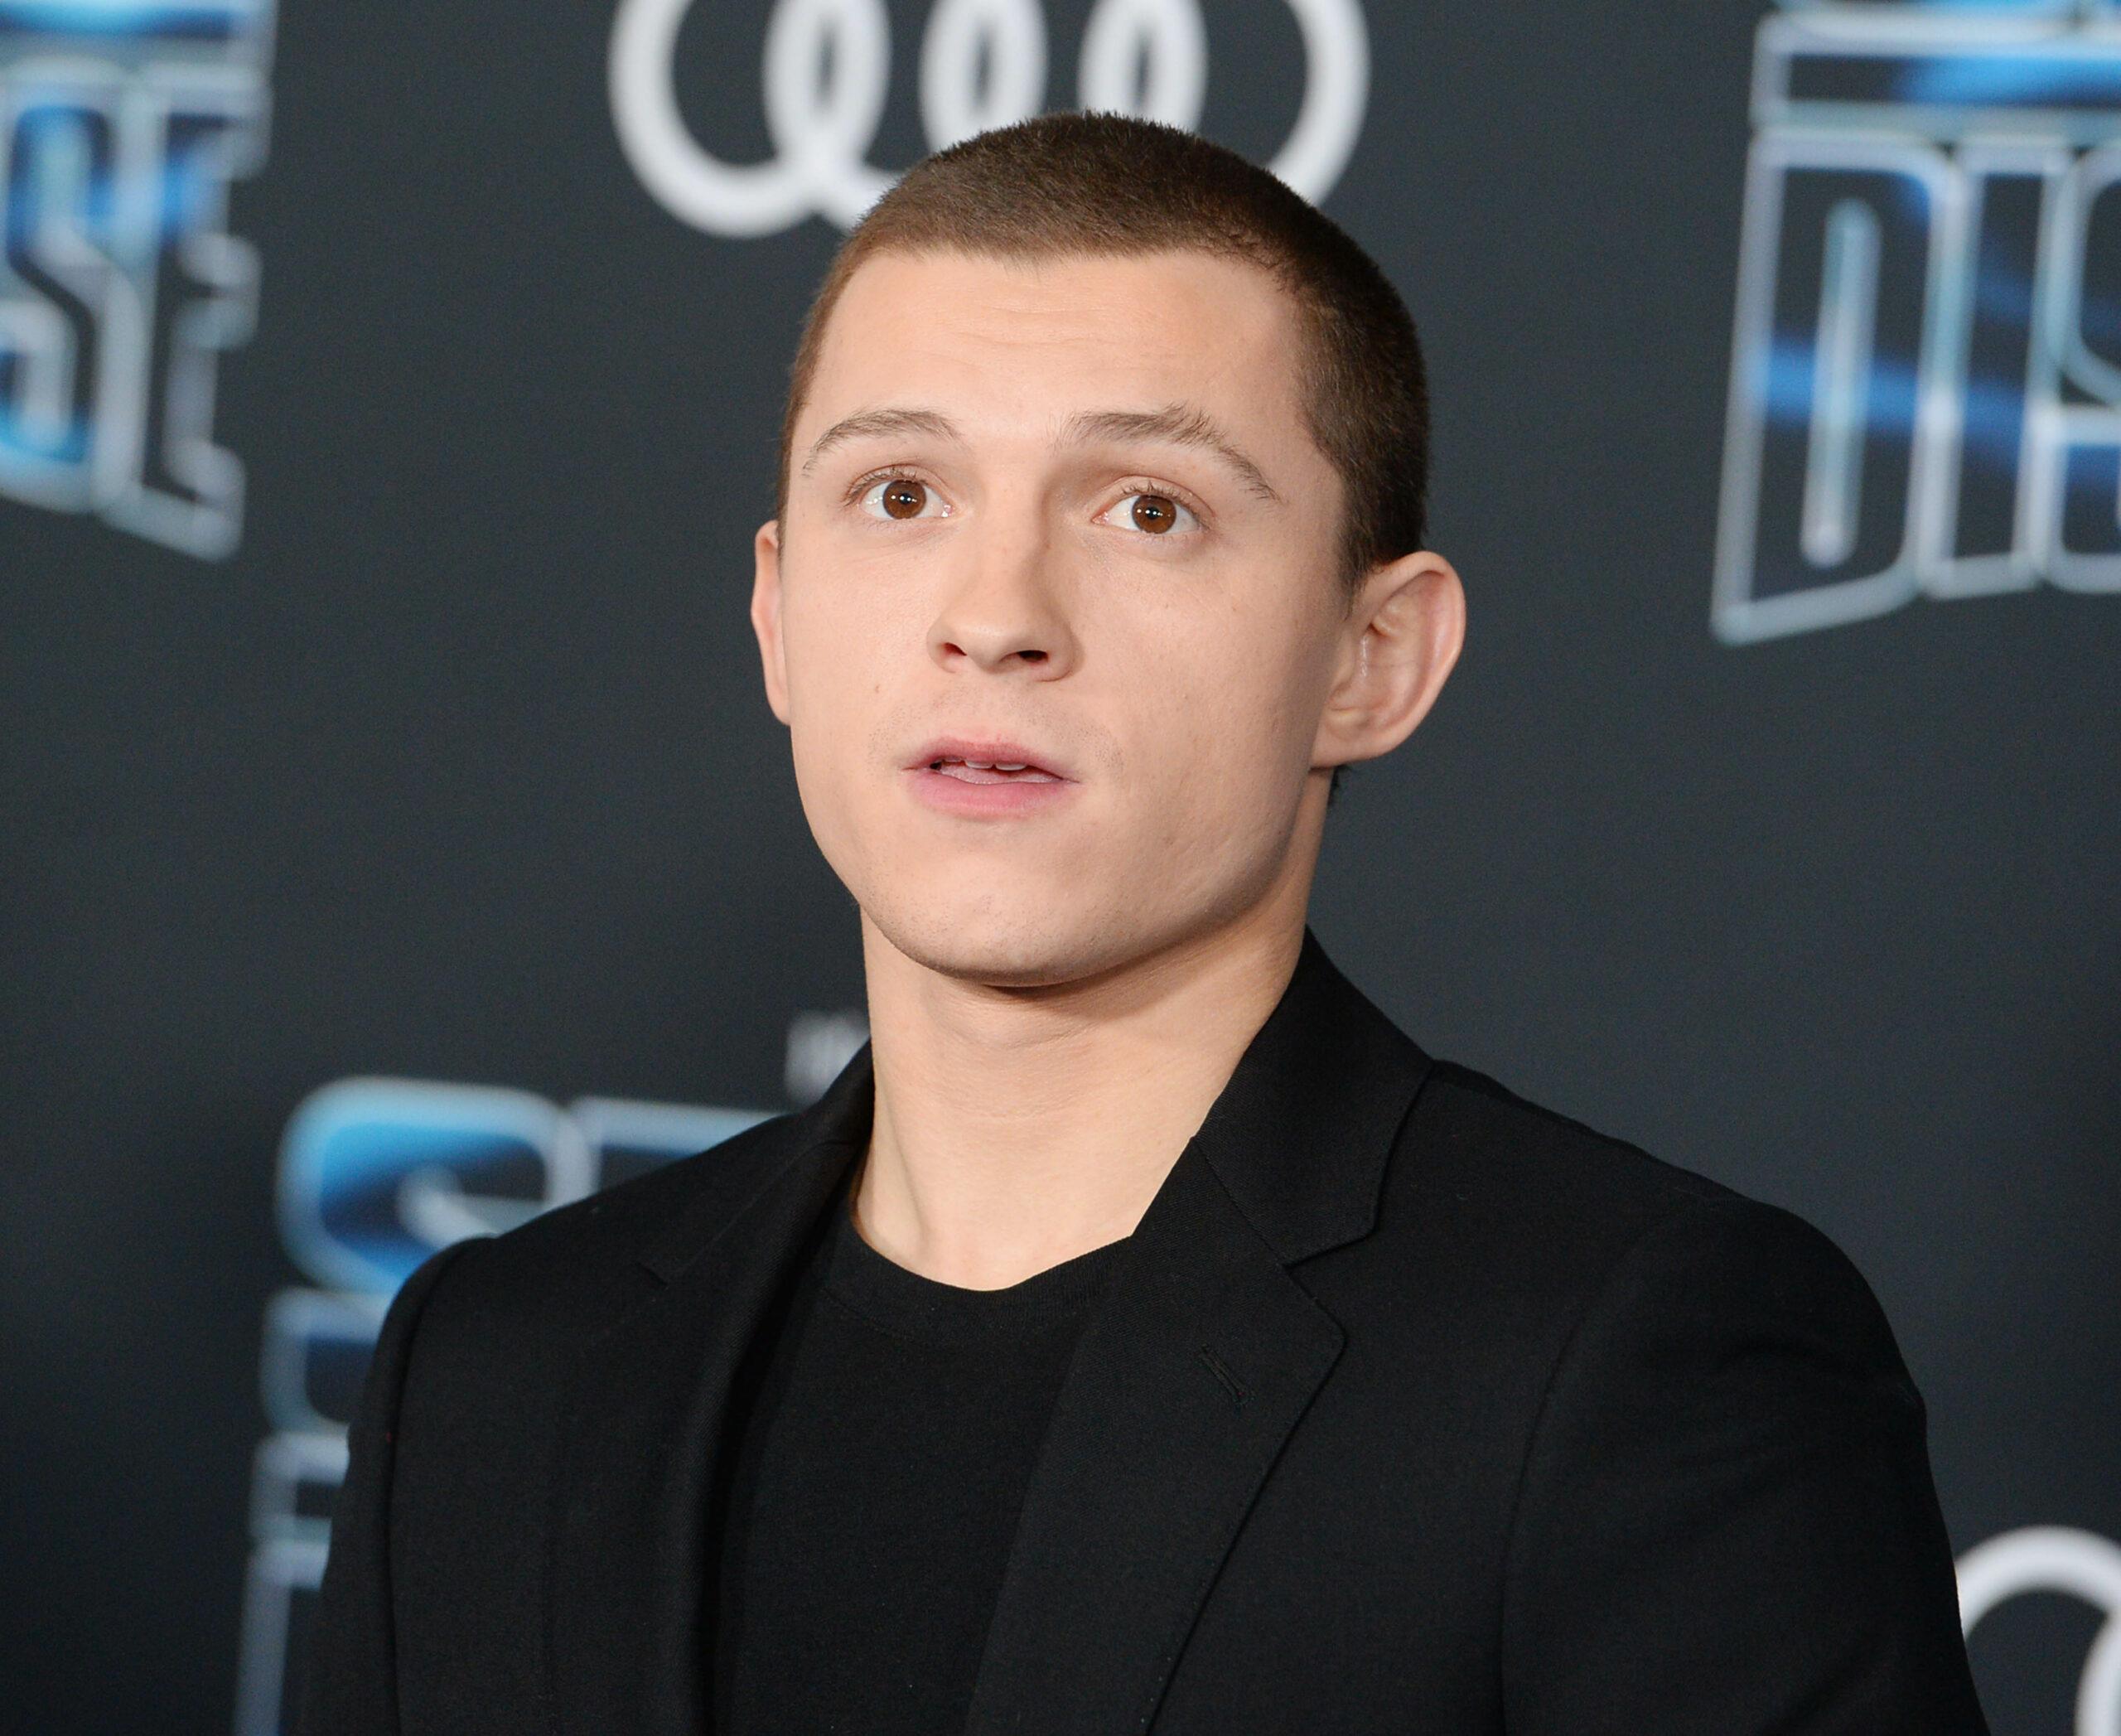 Tom Holland at Spies in Disguise - World Premiere